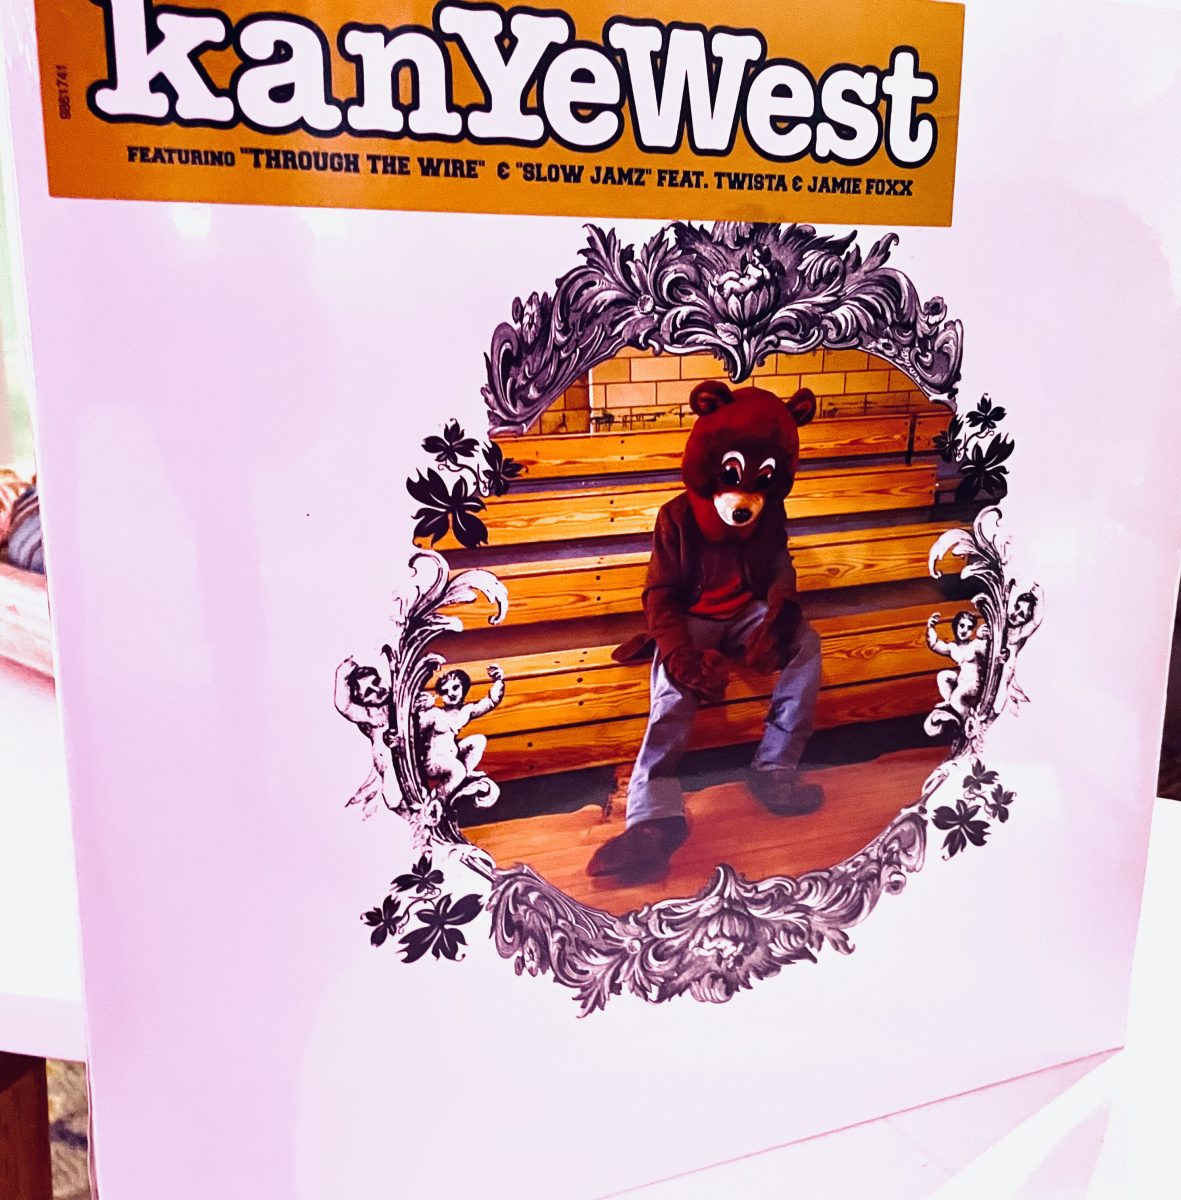 The newer cover for Kanye’s influential and timeless album, “The College Dropout” on vinyl.